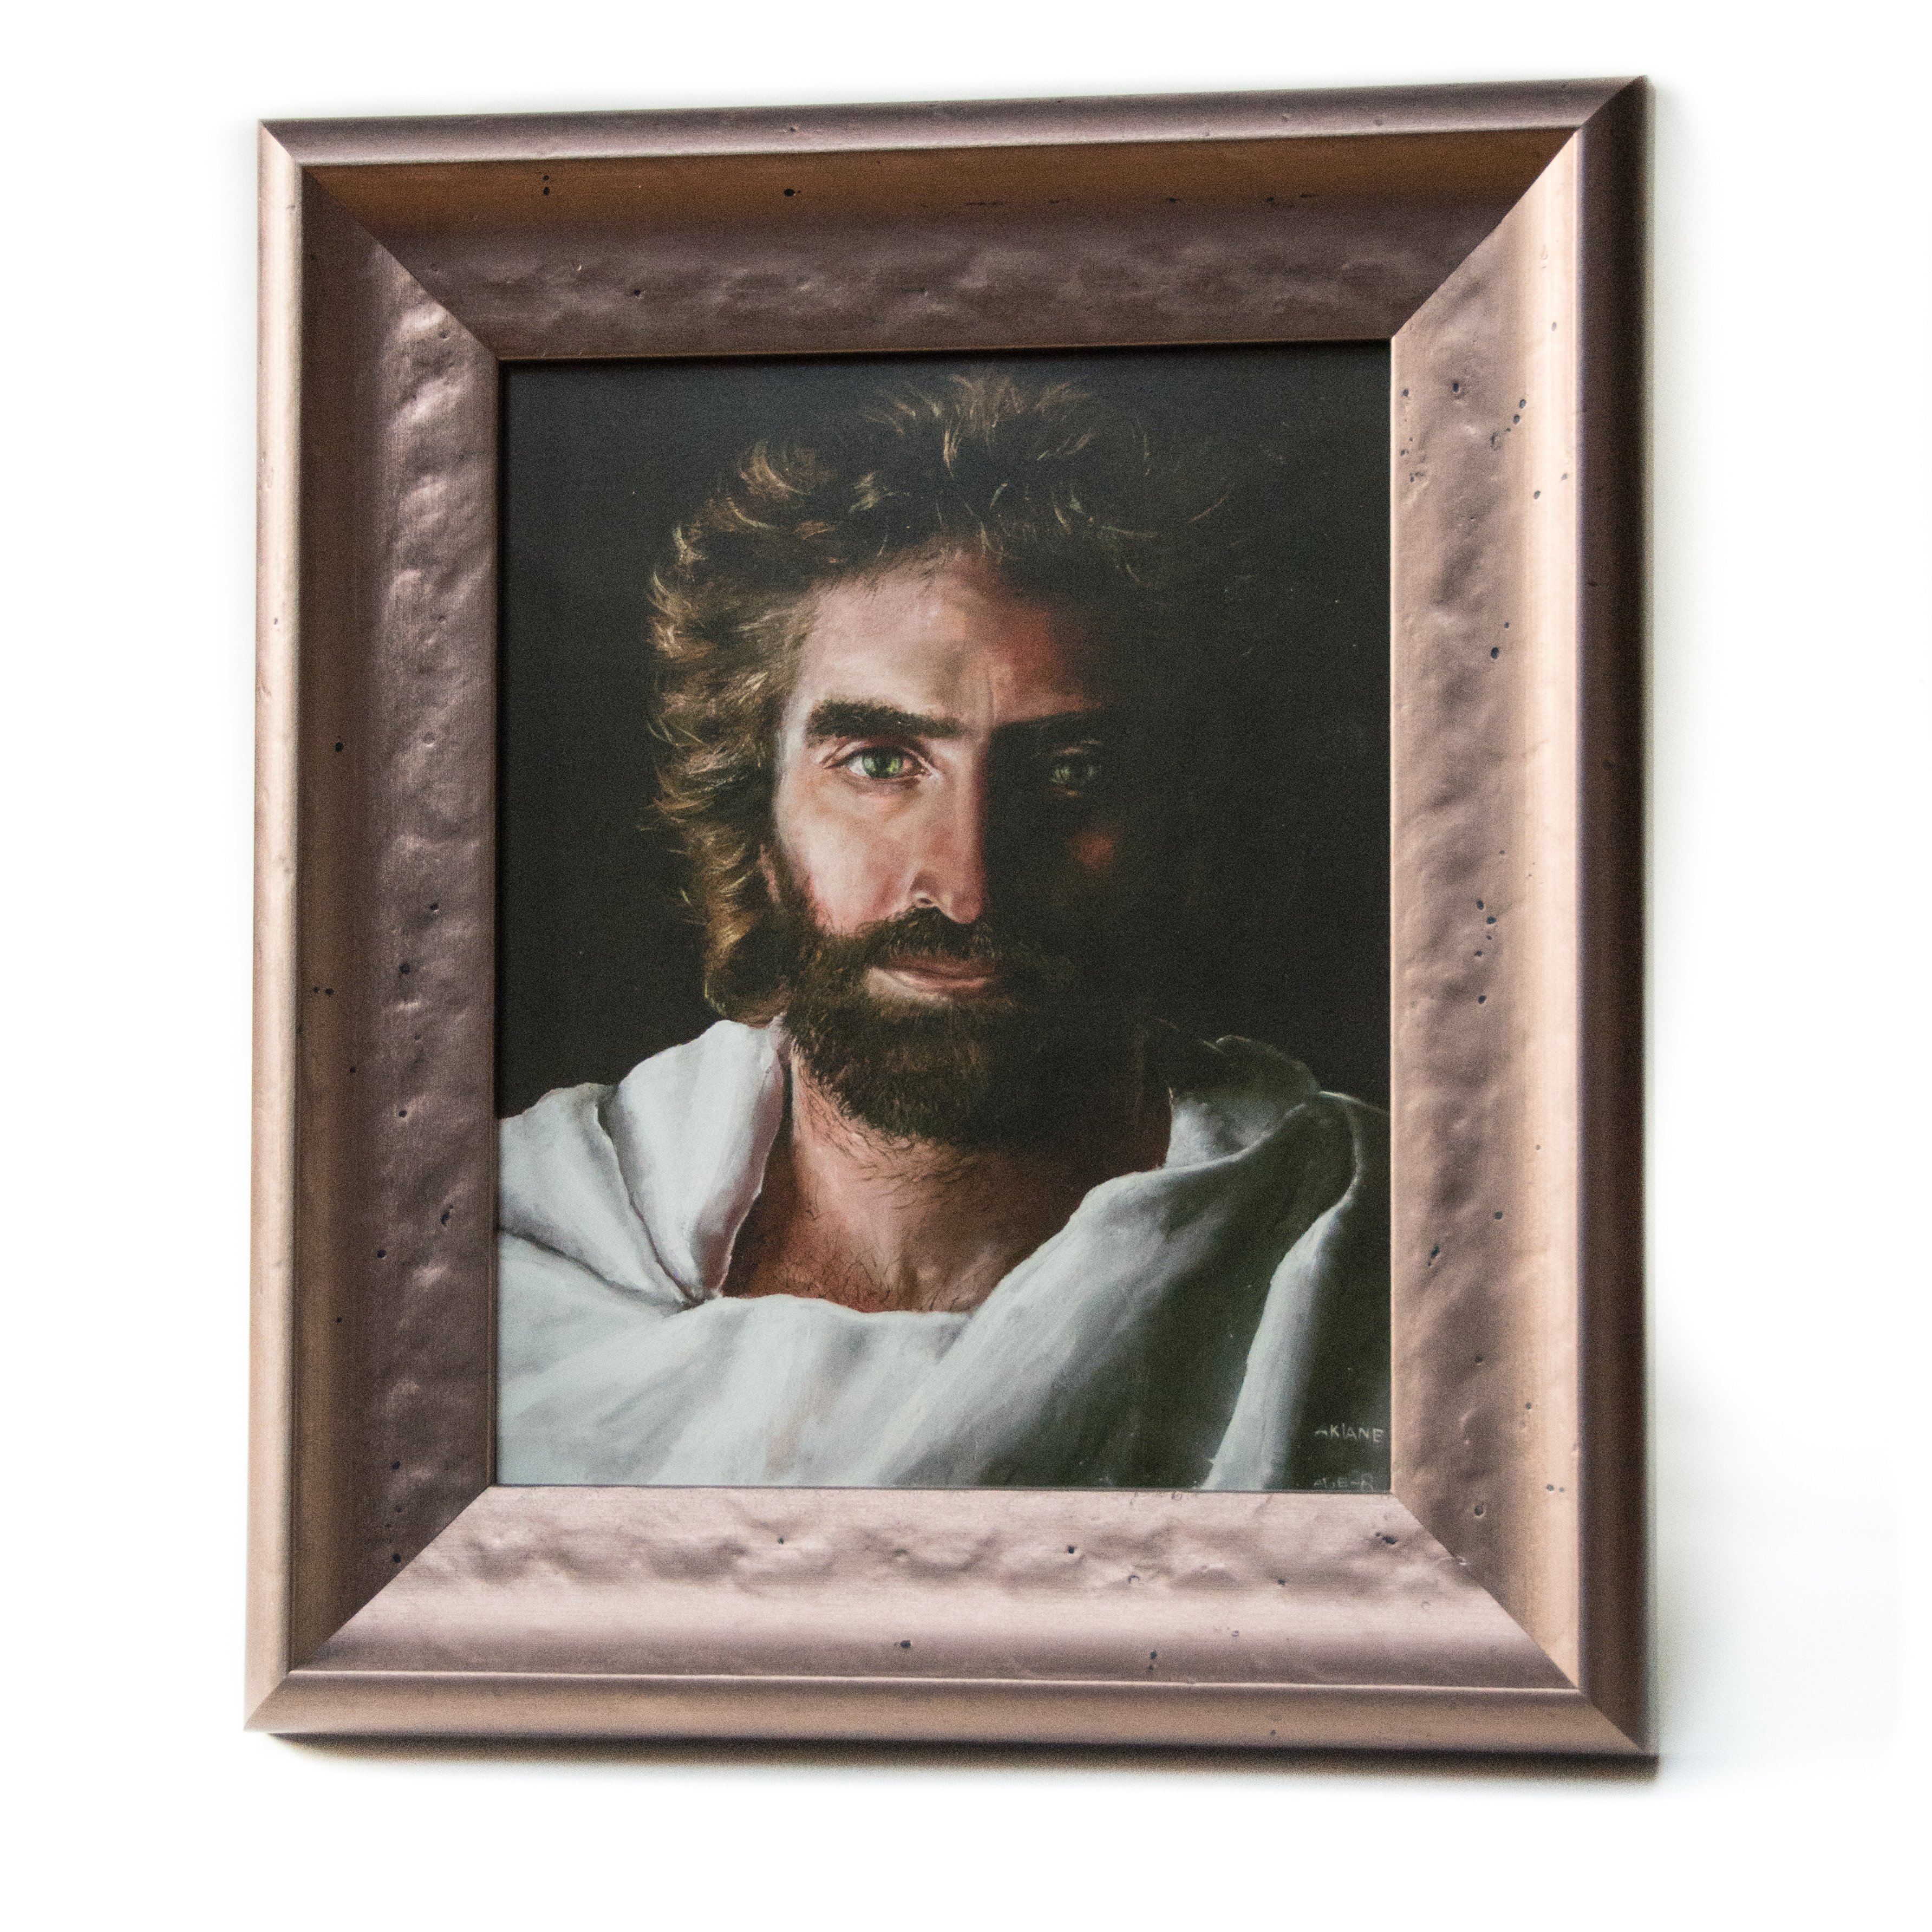 Jesus, Prince of Peace, 8 x 10 inch Art by Akiane from Art & SoulWorks